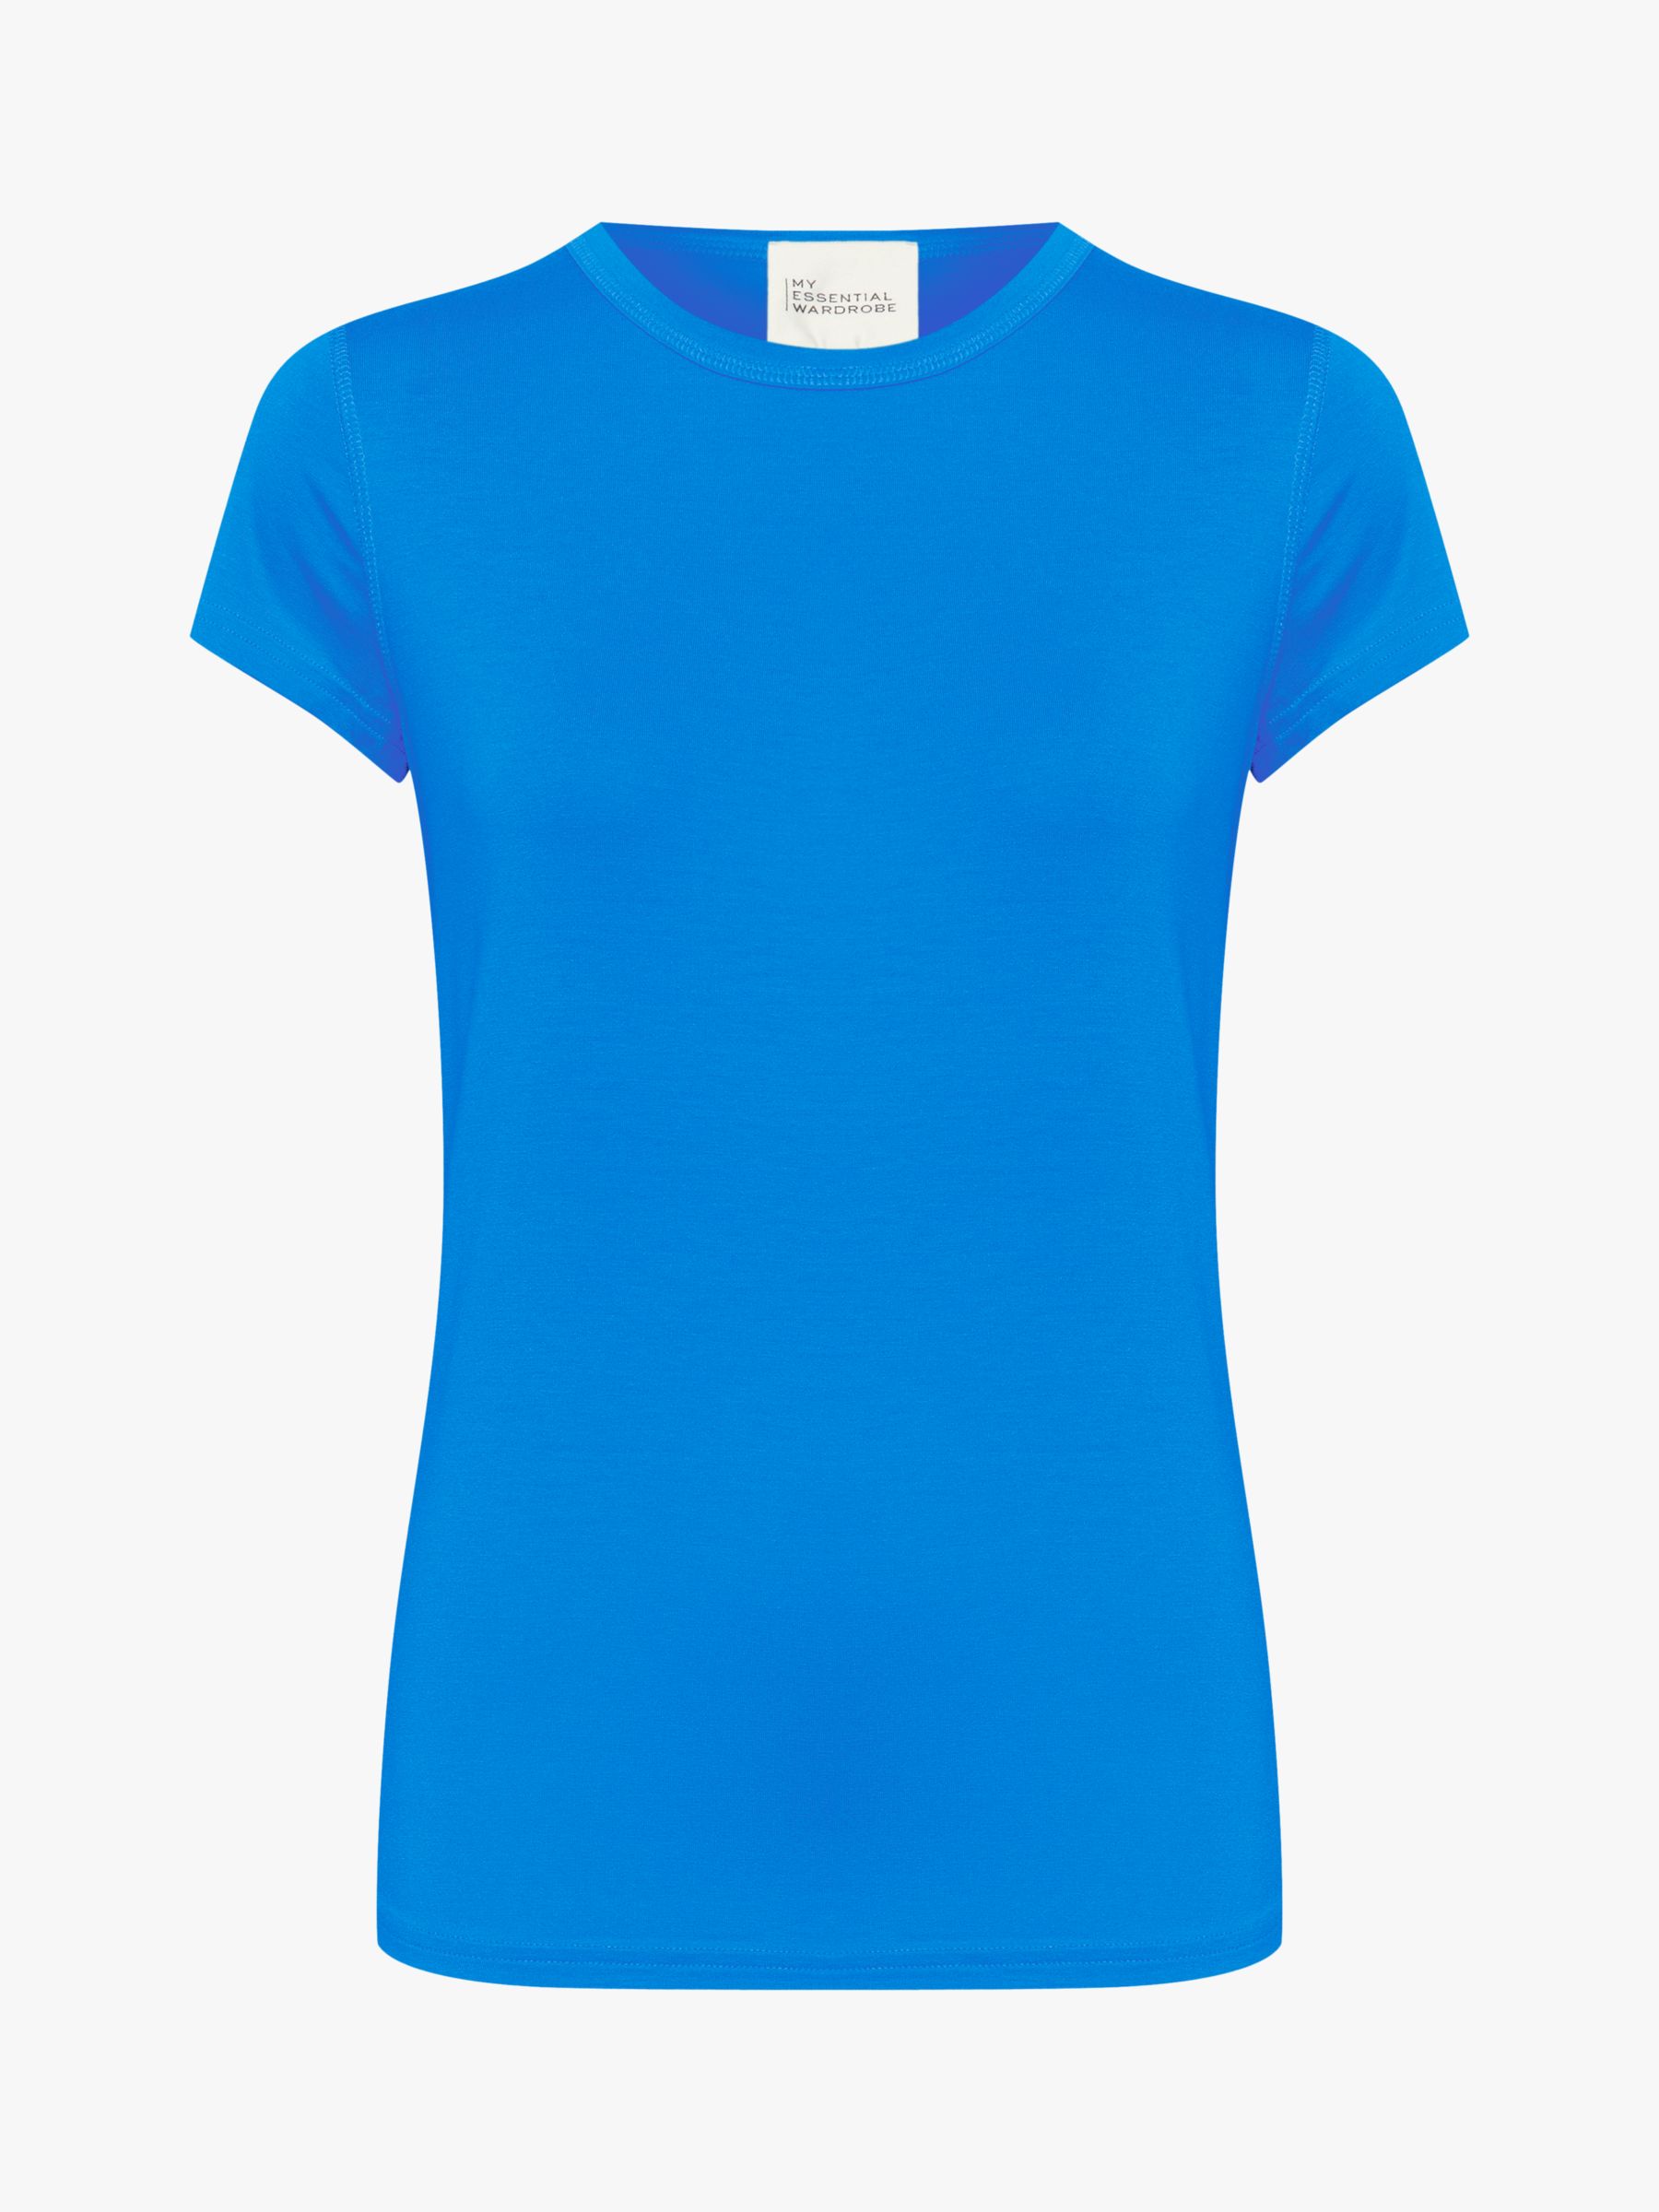 Buy MY ESSENTIAL WARDROBE The Modal Tee, Directoire Blue Online at johnlewis.com